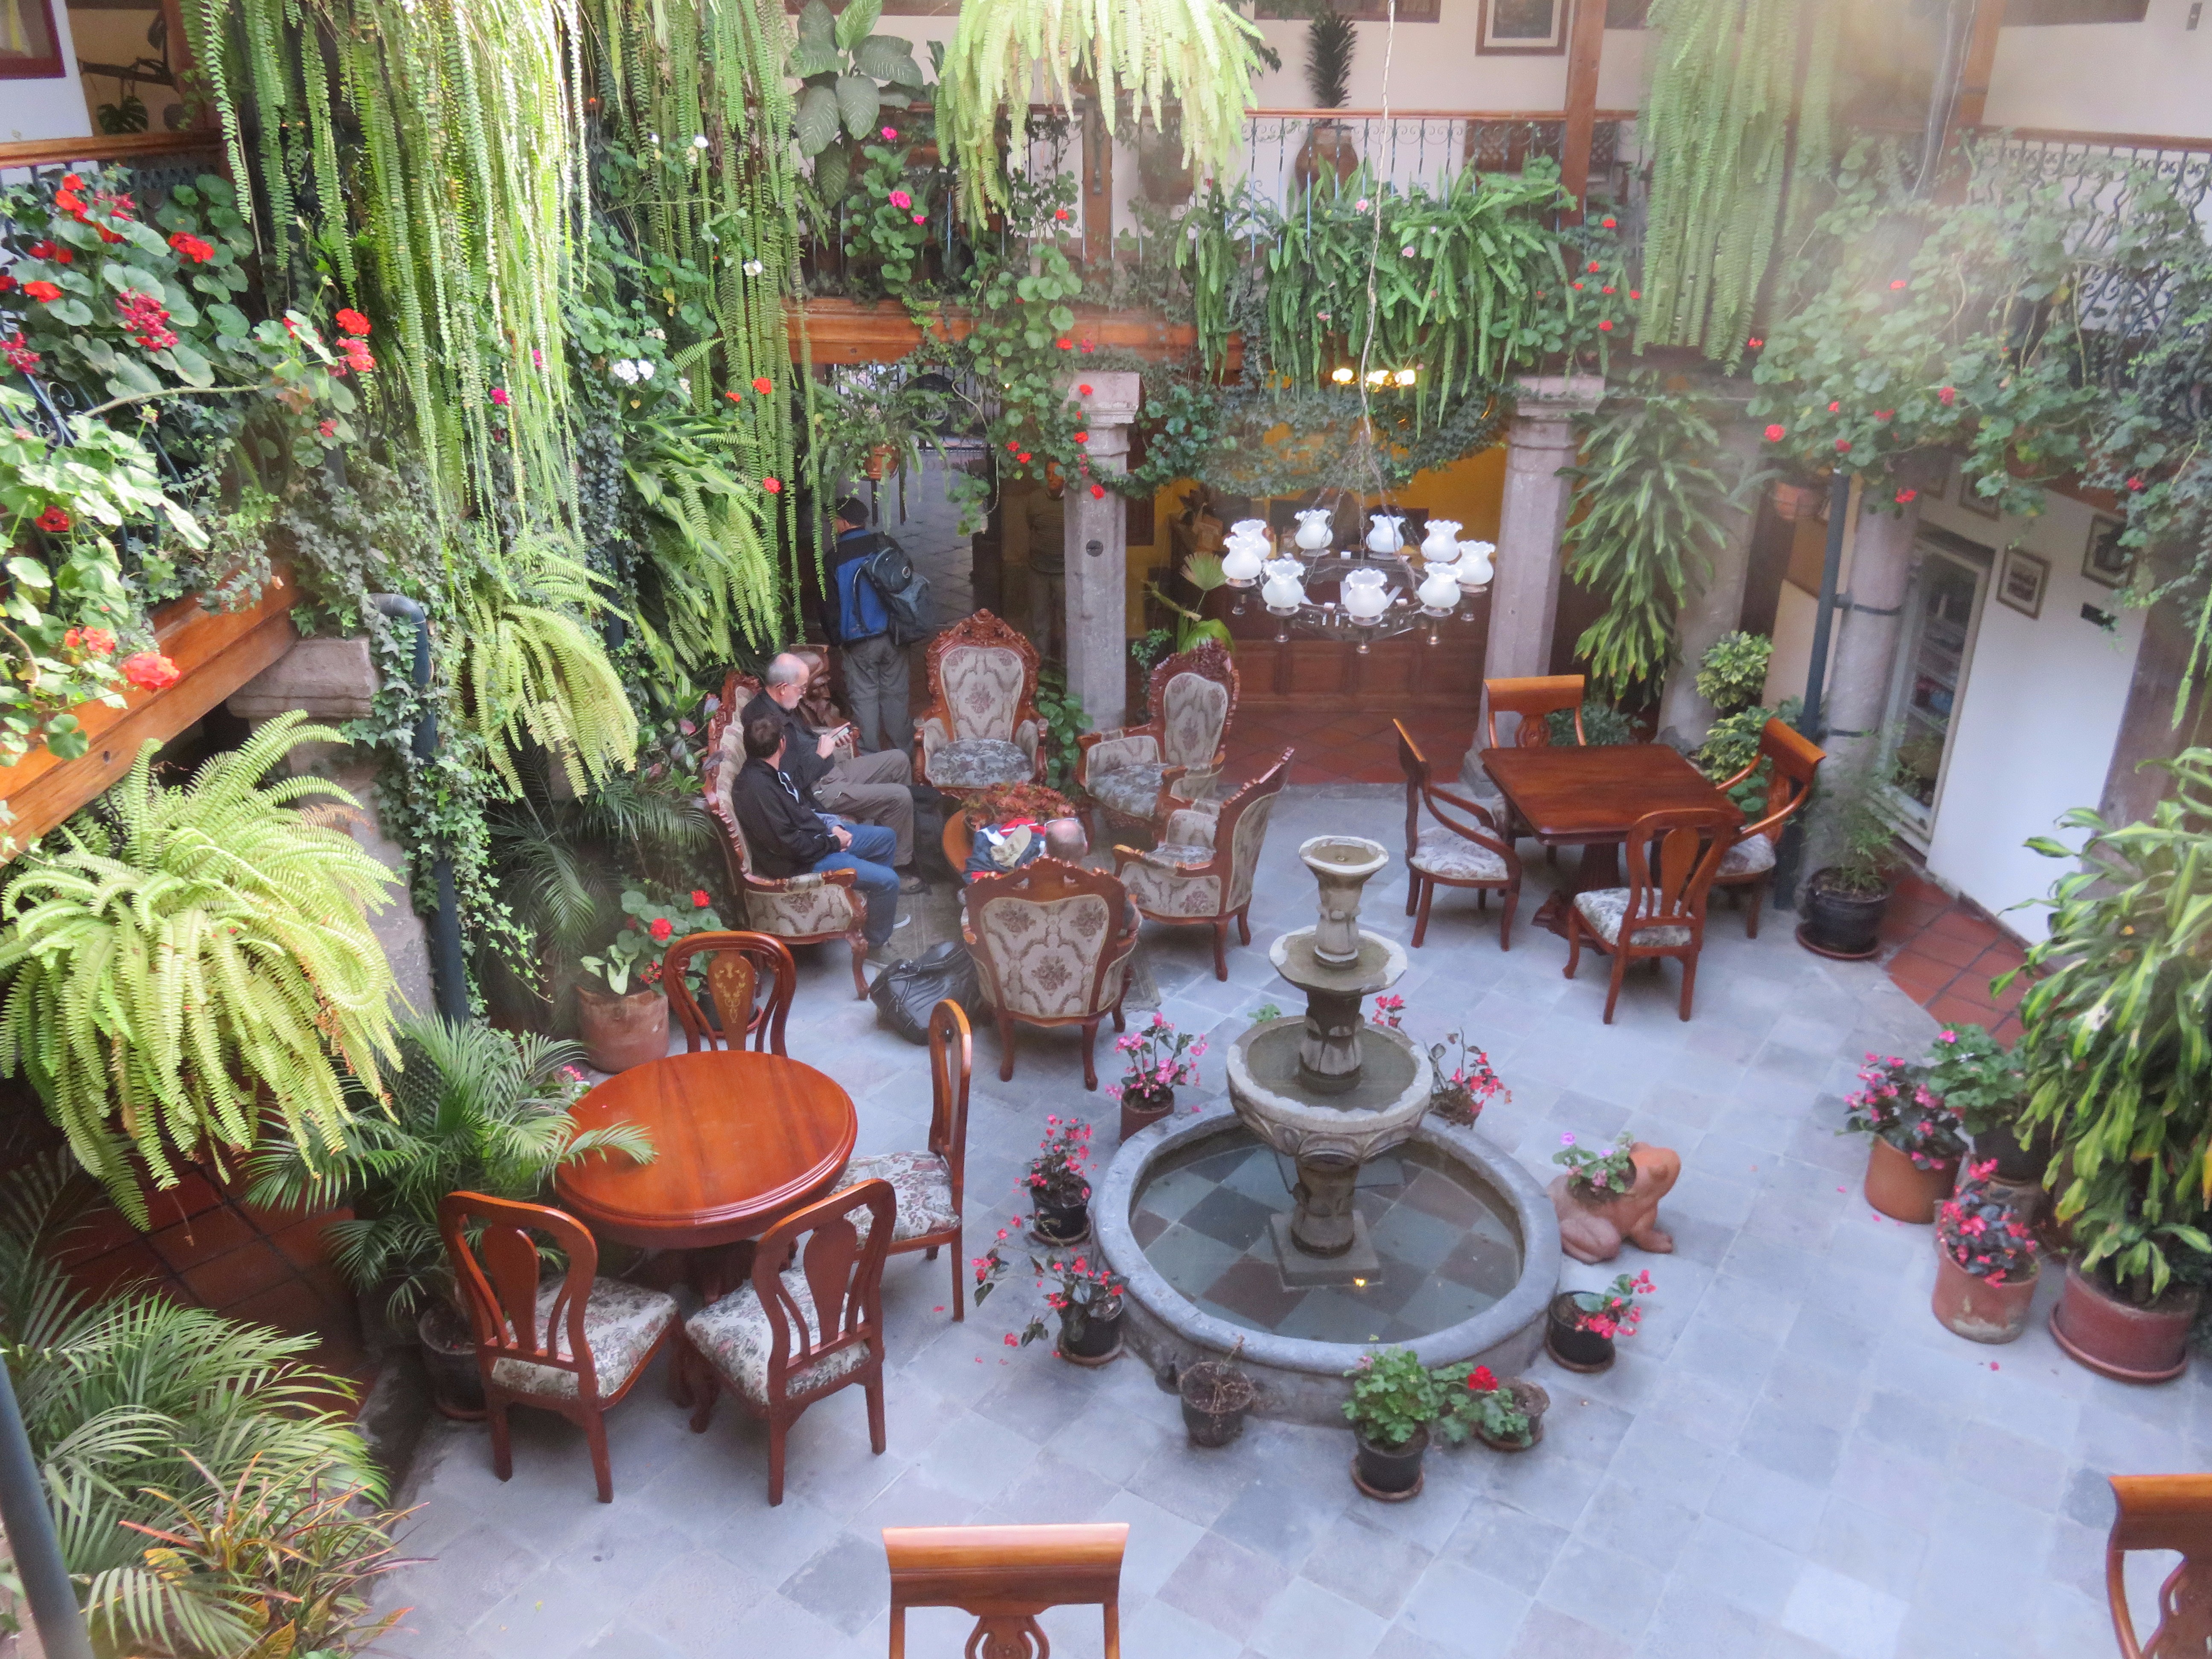 The lobby of the Hotel San Francisco de Quito where the team stayed.